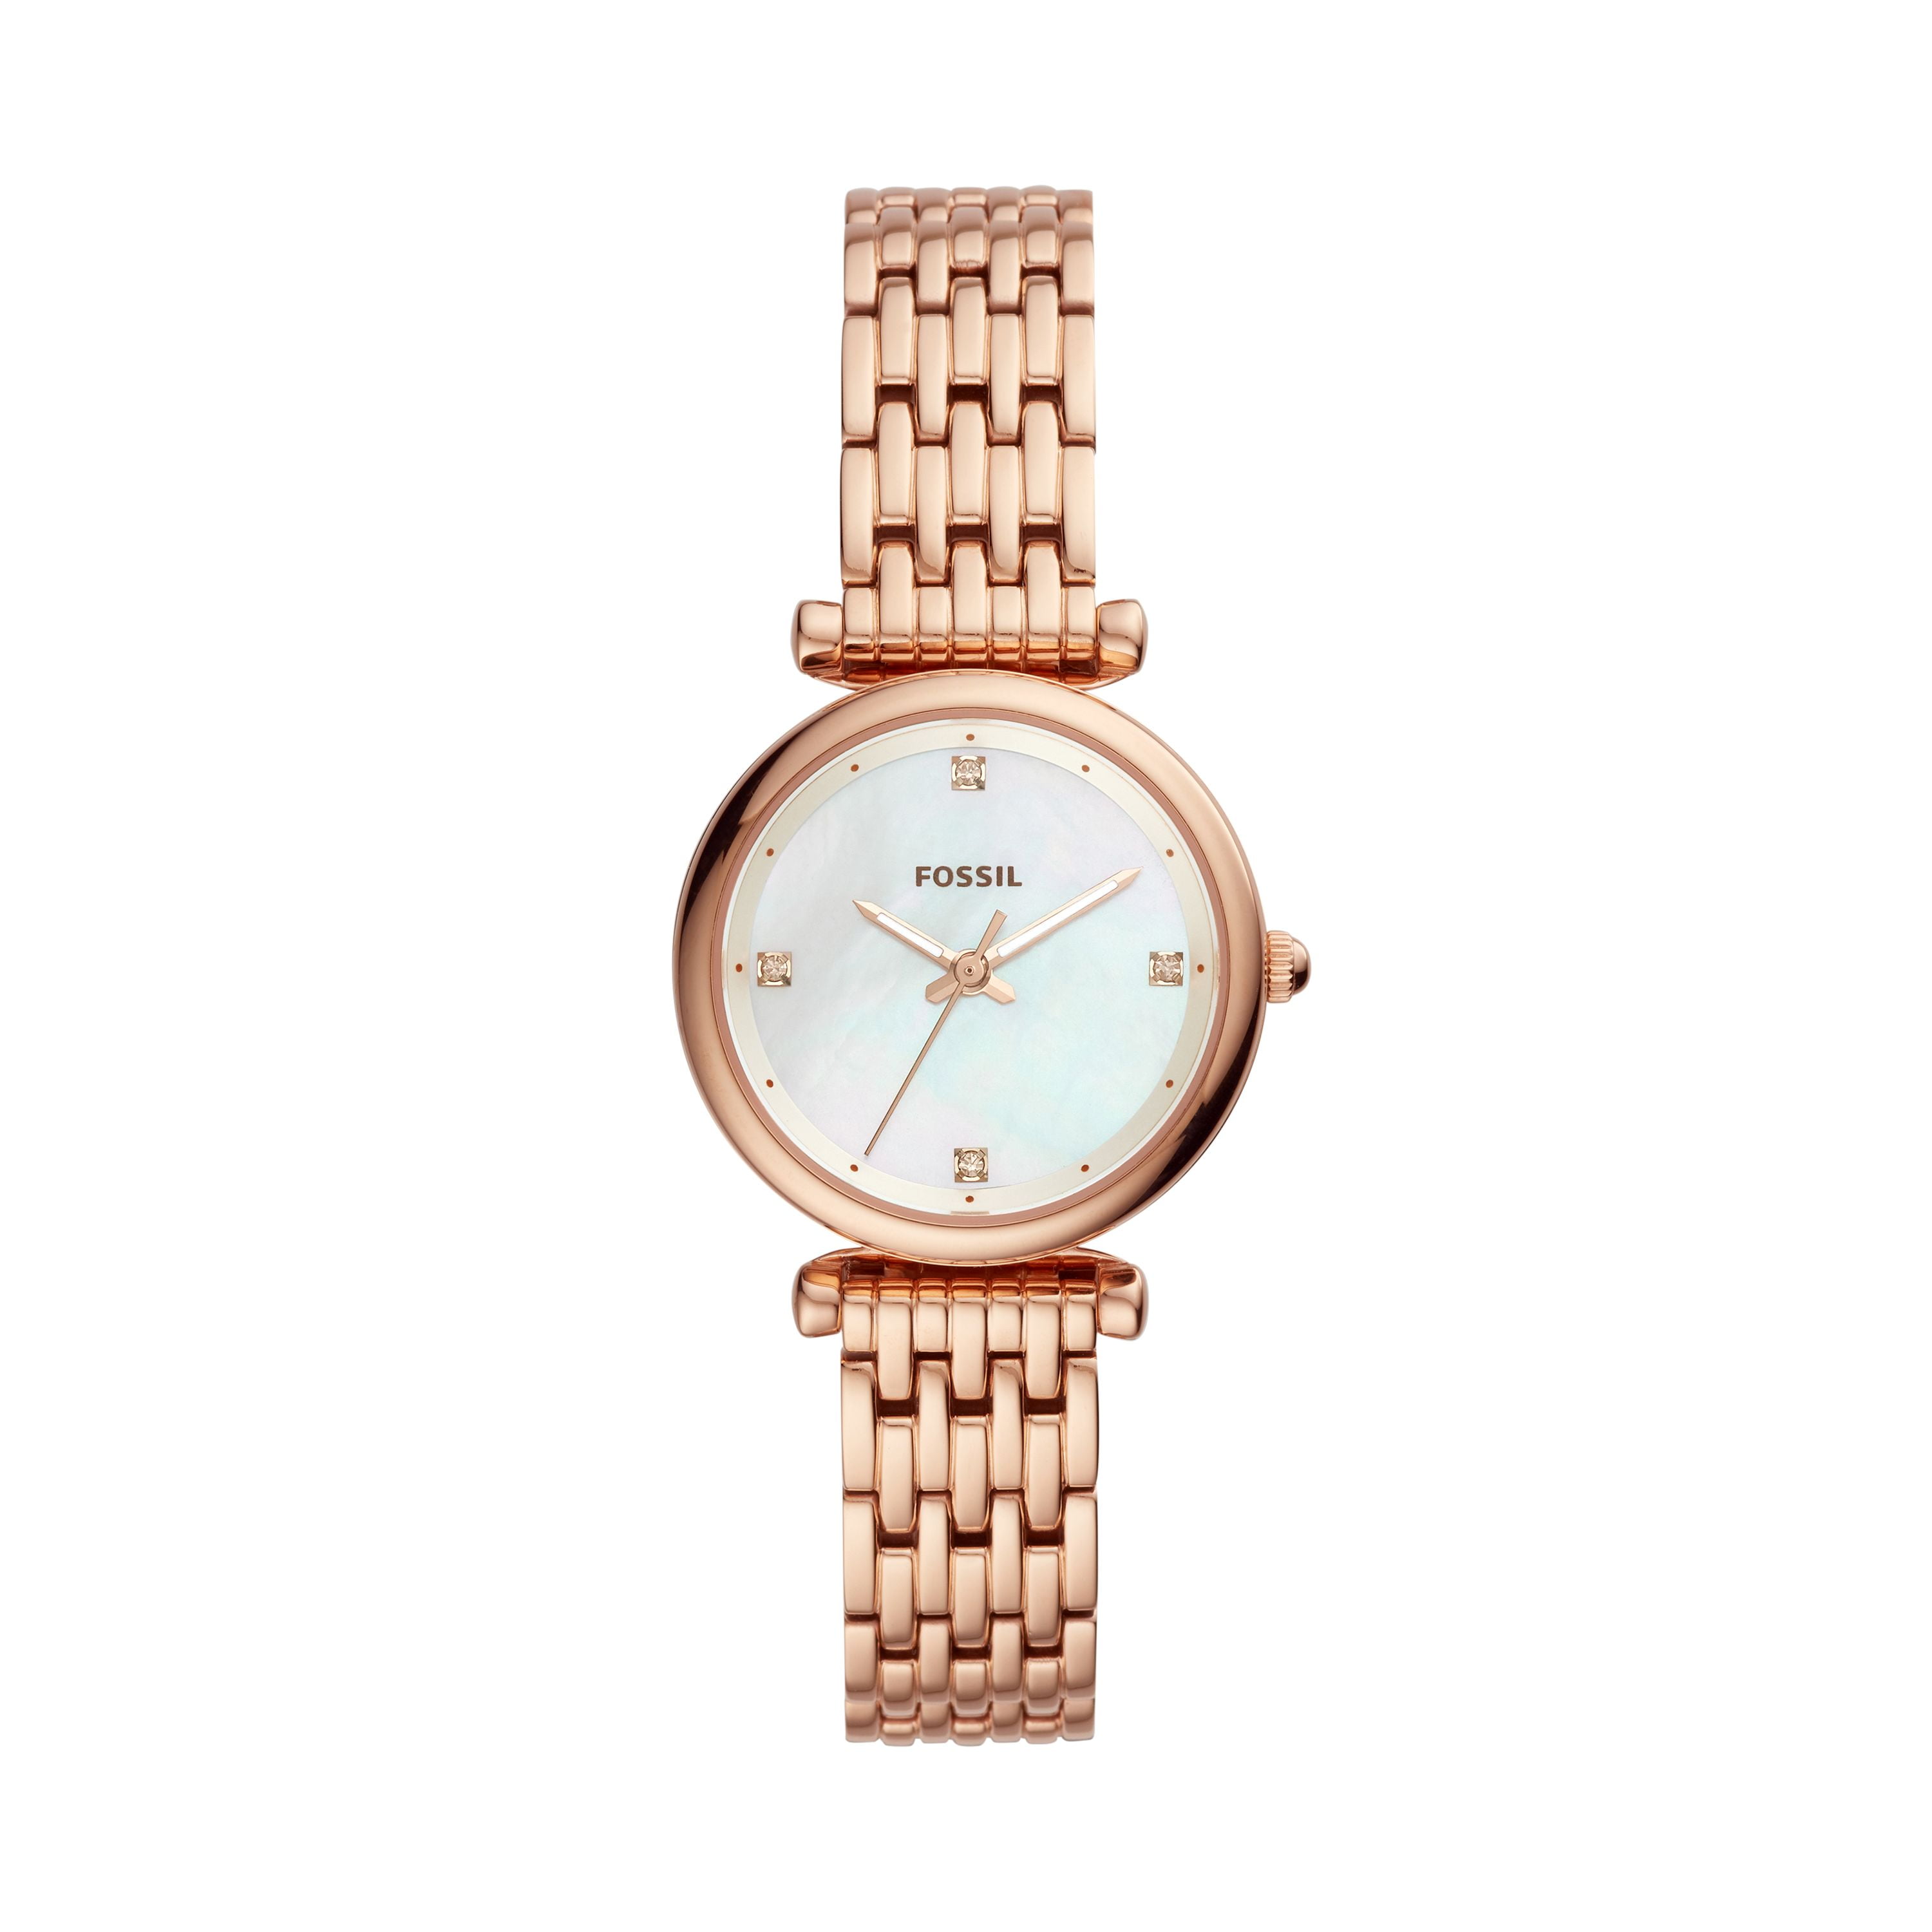 Fossil Women's Carlie Mini Three-Hand, Rose Gold-Tone Stainless Steel ...